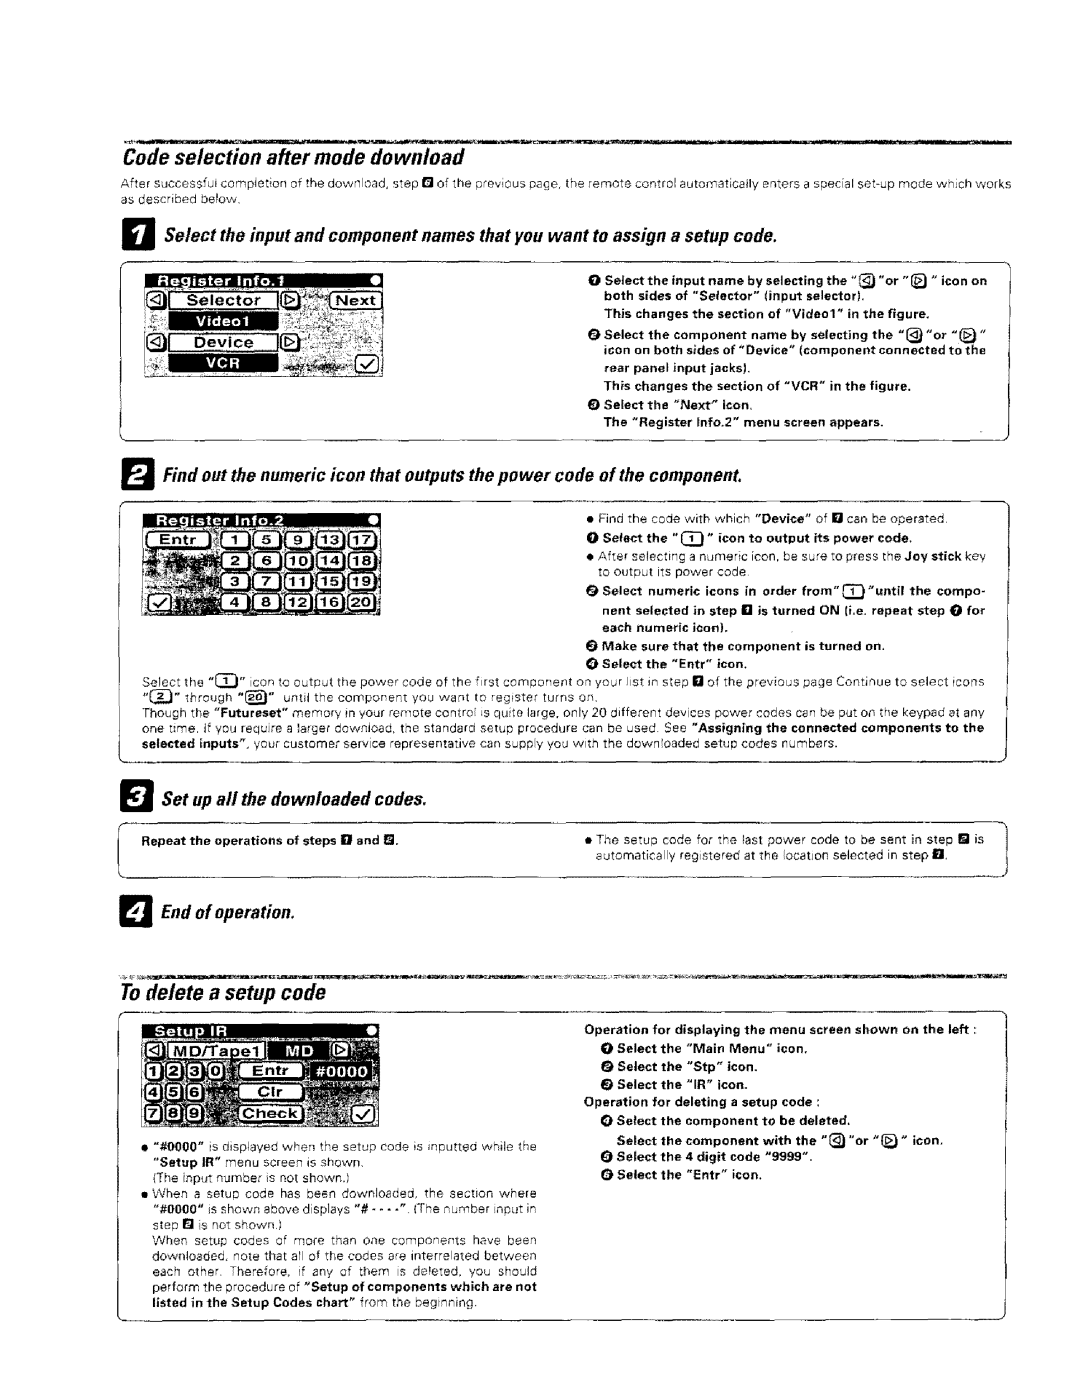 Kenwood VR-2000 Code selection after mode download, To delete a setup code, _l Set up all the downloaded codes 